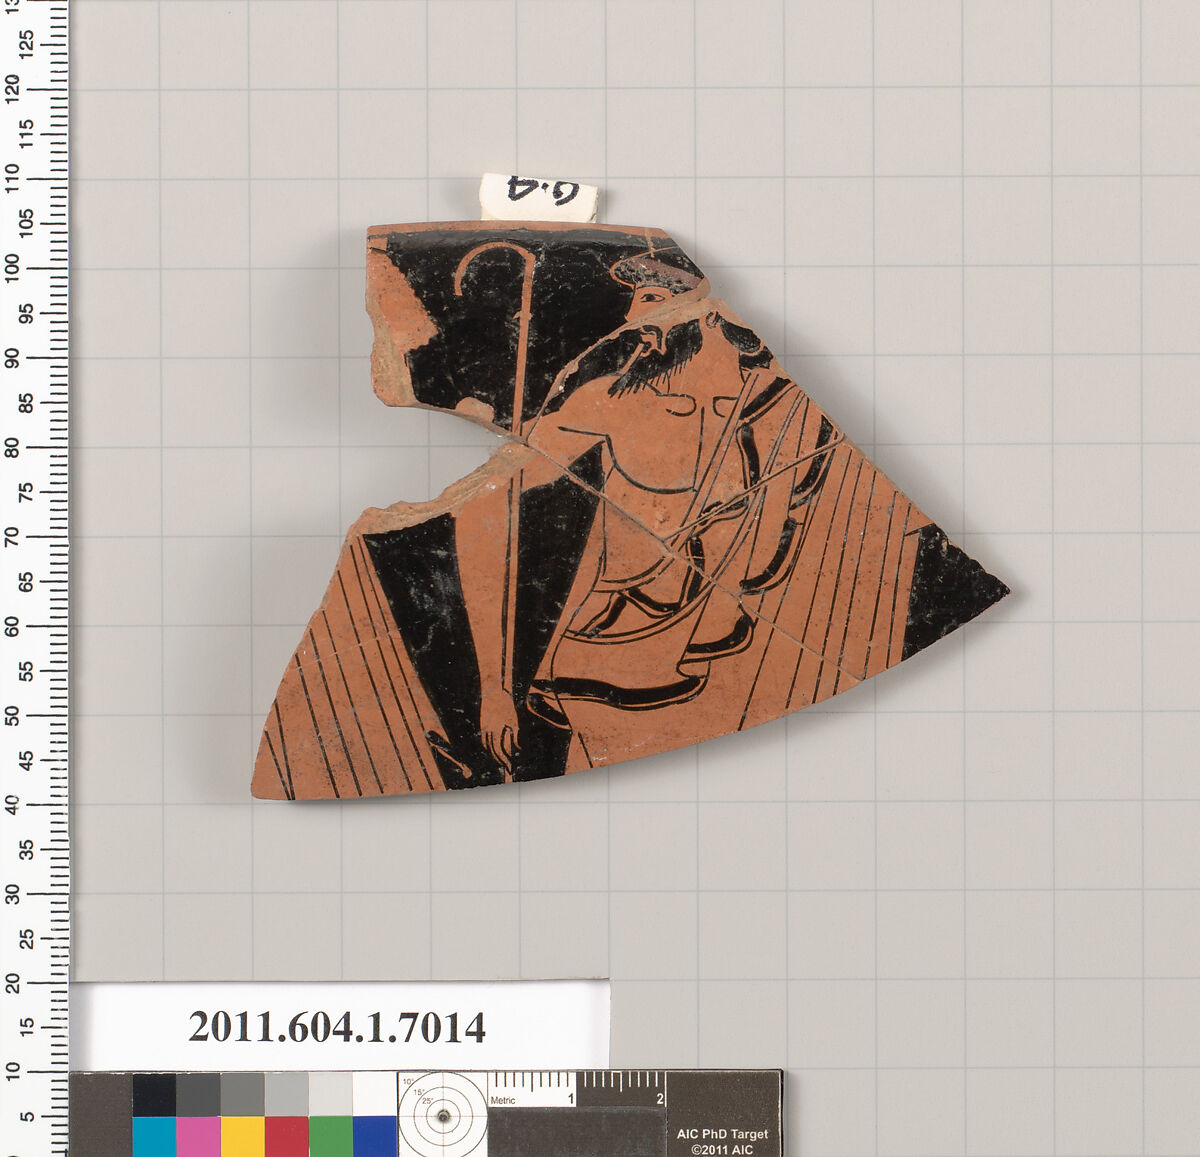 Terracotta rim fragment of a kylix (drinking cup), Attributed to Douris [DvB], Terracotta, Greek, Attic 